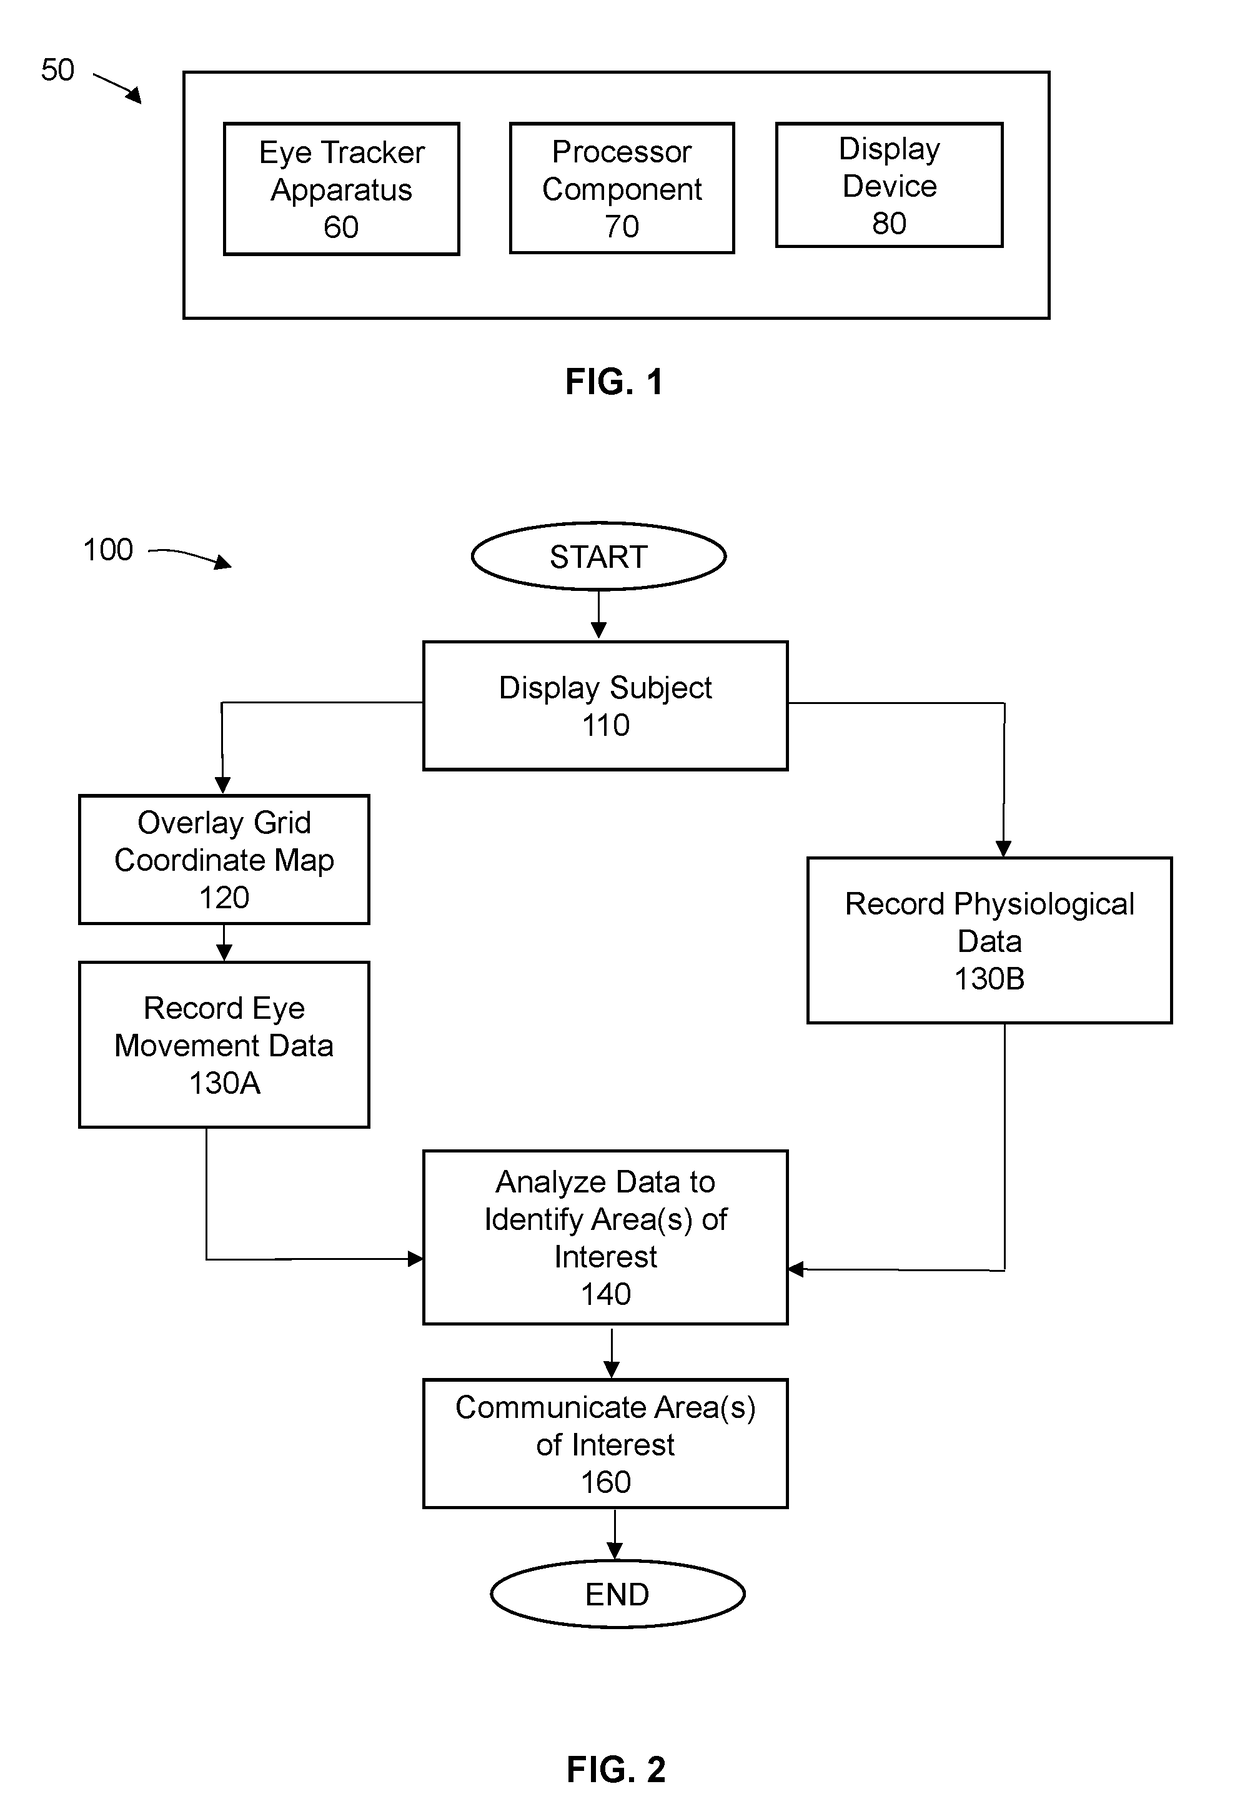 System and methods for evaluating images and other subjects